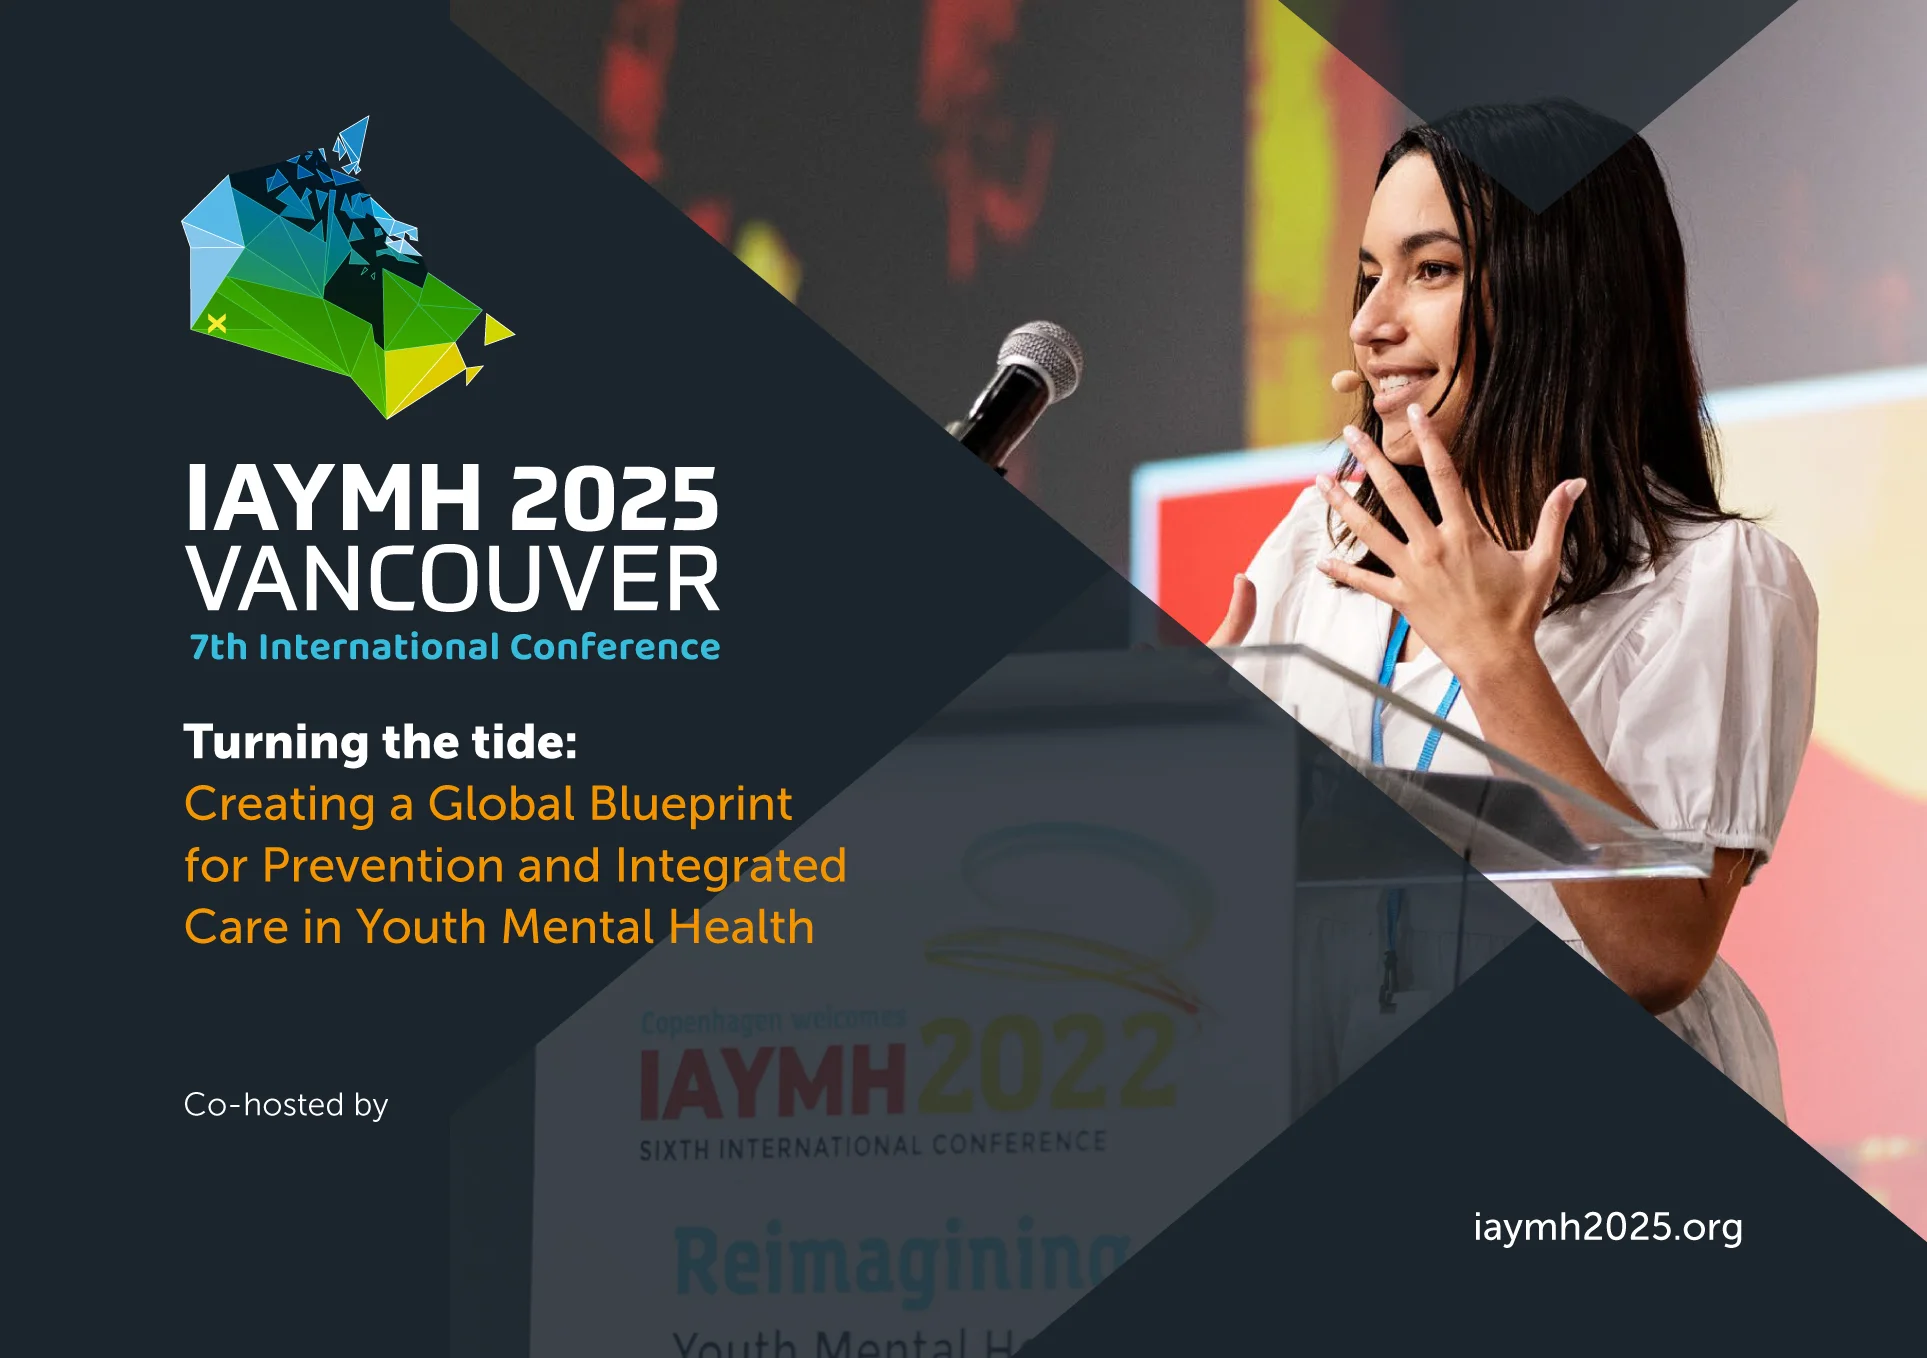 IAYMH Vancouver Prospectus 2025 - IAYMH2025 | Vancouver - 7th International Conference